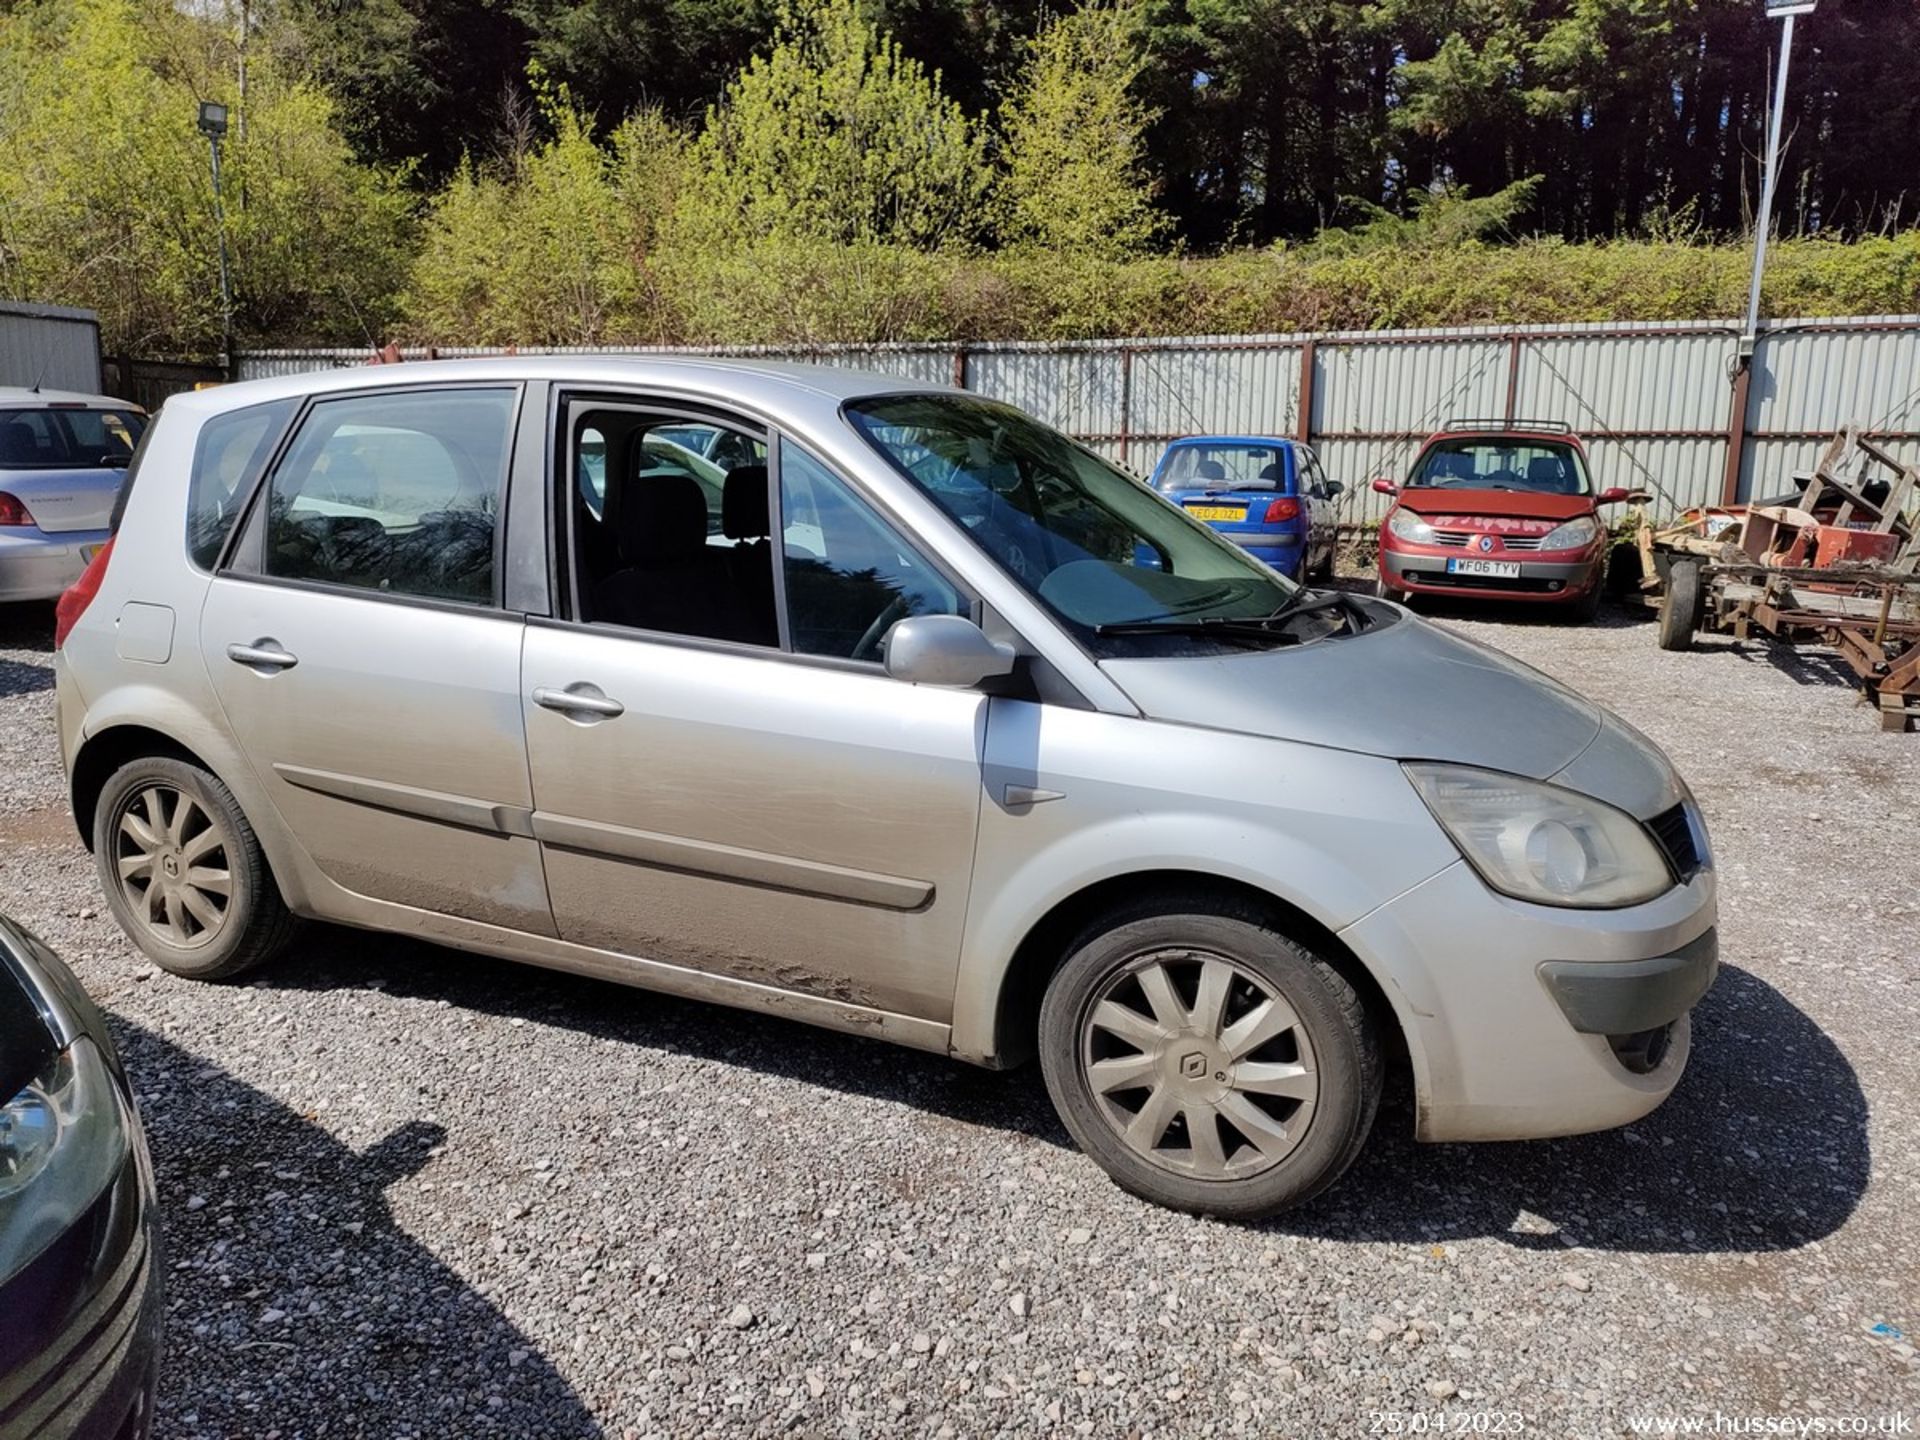 07/07 RENAULT SCENIC DYN VVT - 1598cc 5dr MPV (Silver) - Image 23 of 34